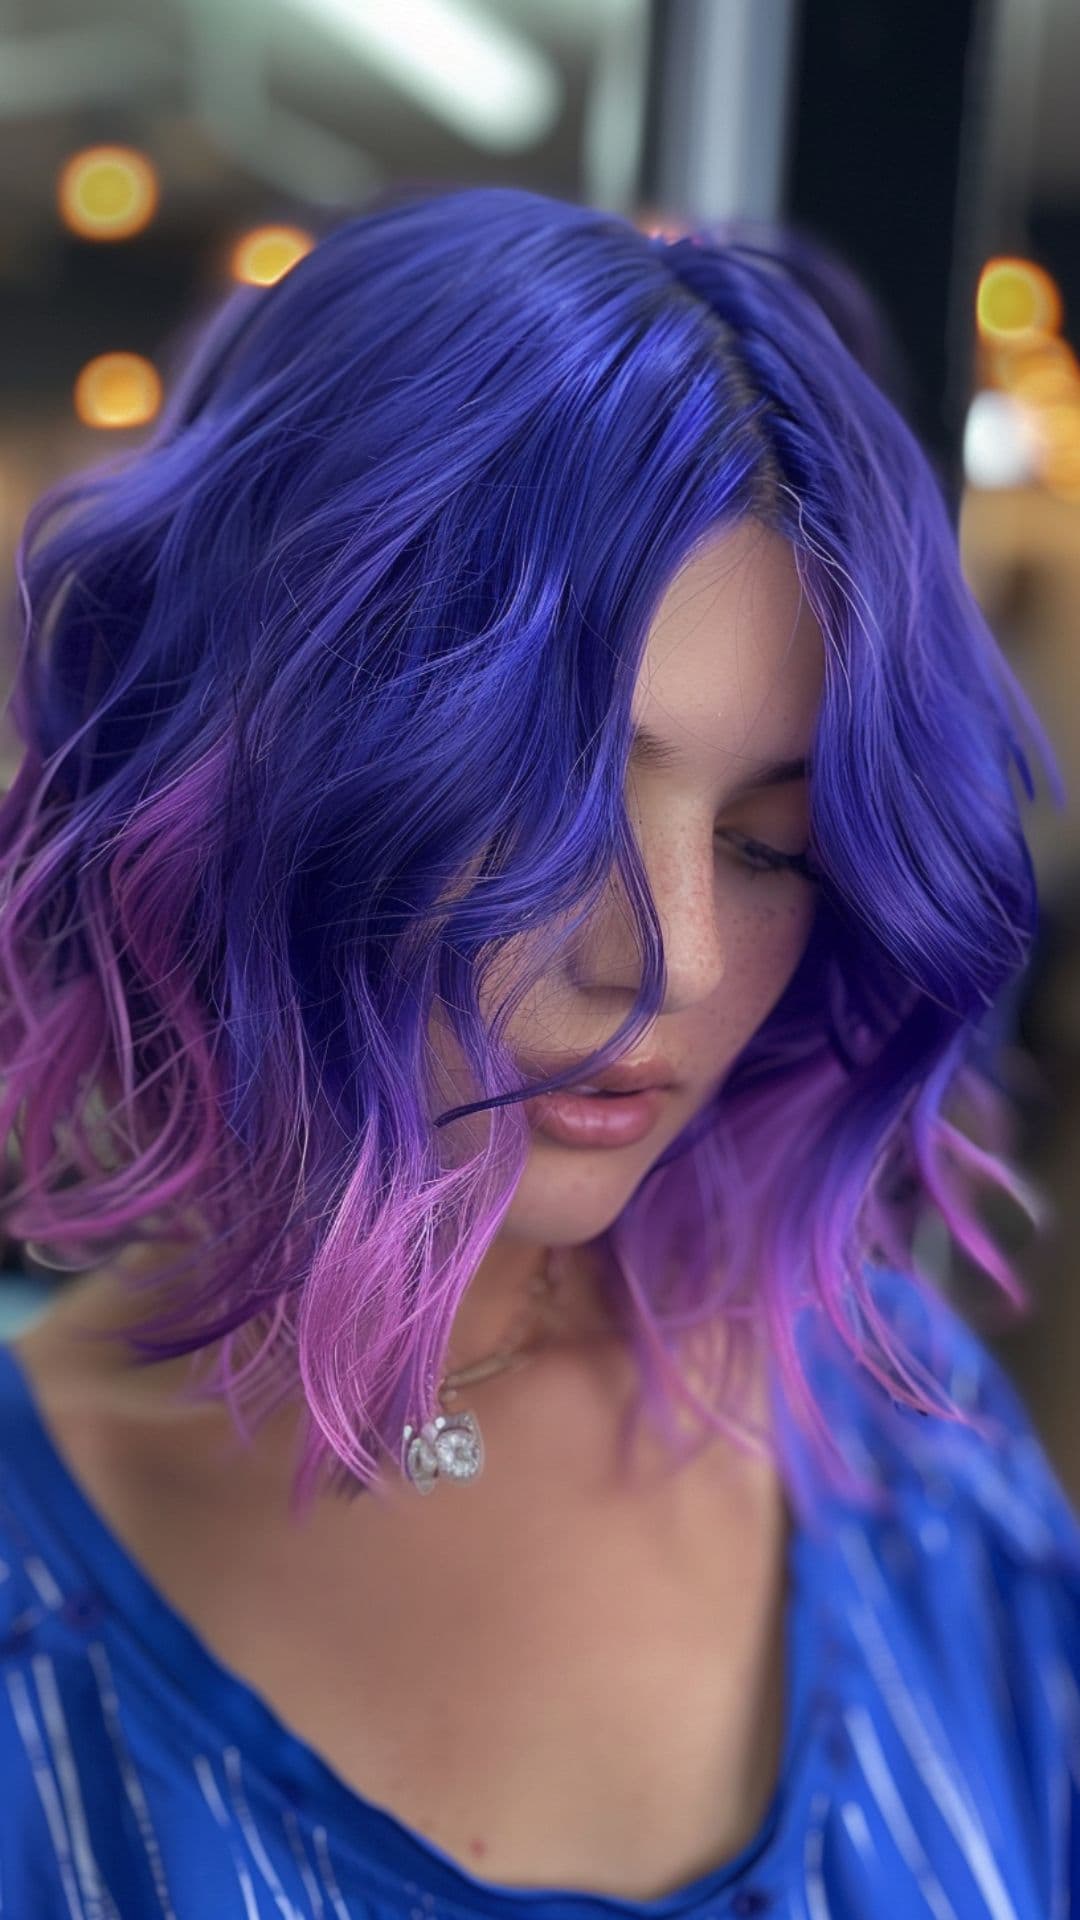 A woman modelling an ultra violet hair.